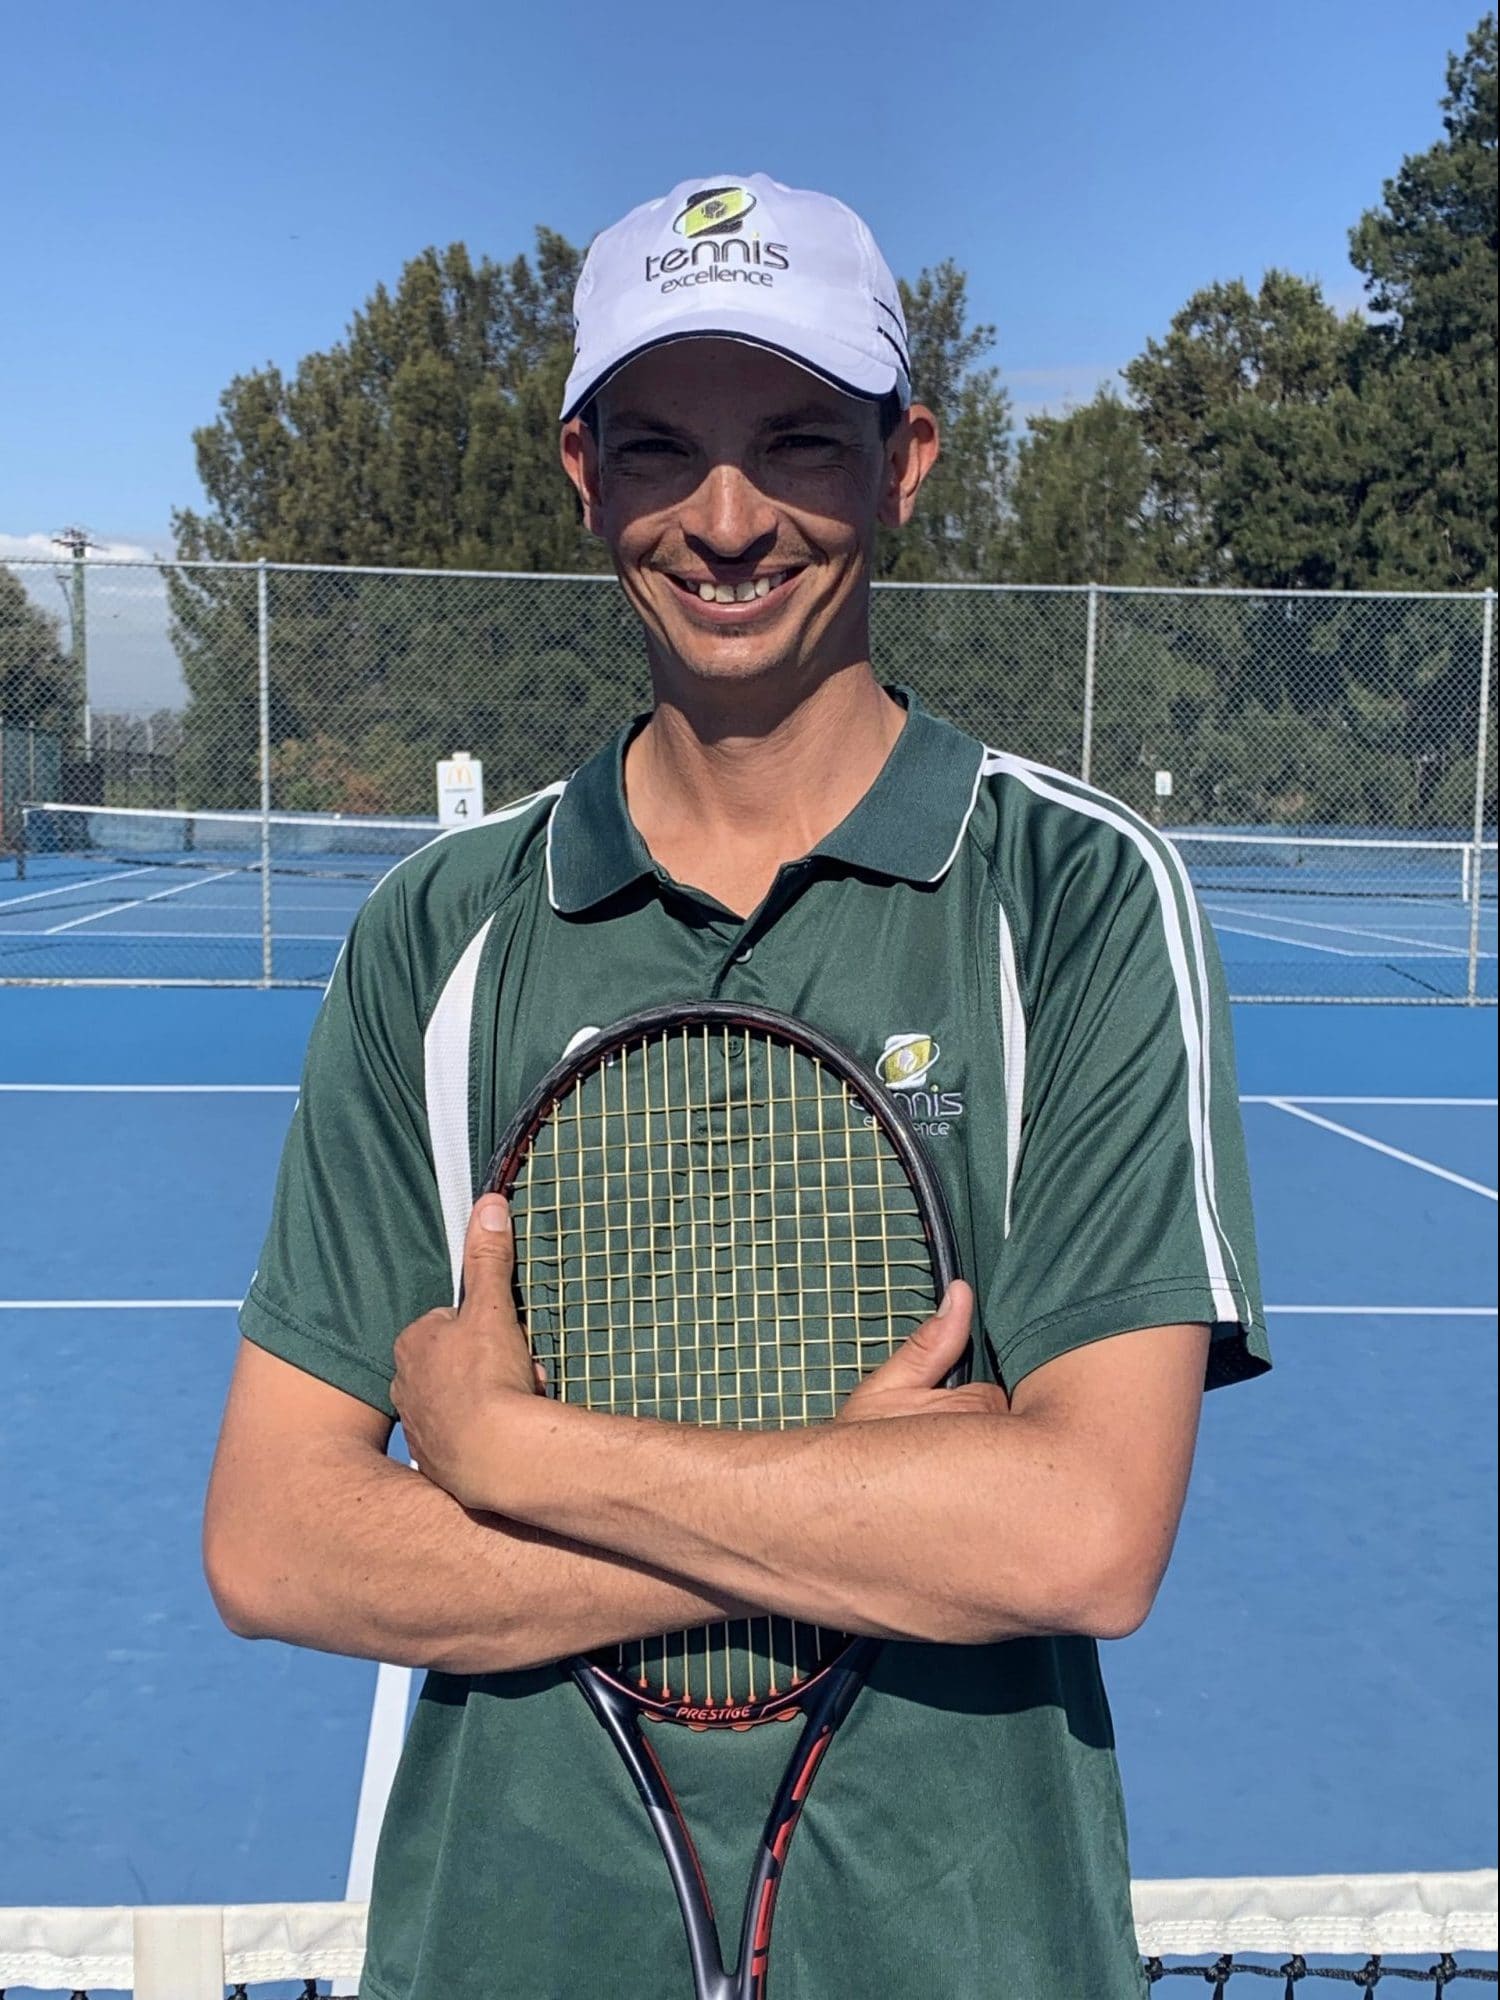 https://www.tennisexcellence.com.au/wp-content/uploads/2020/05/Coach_Andrew-Woodward-scaled-e1589777022515.jpg